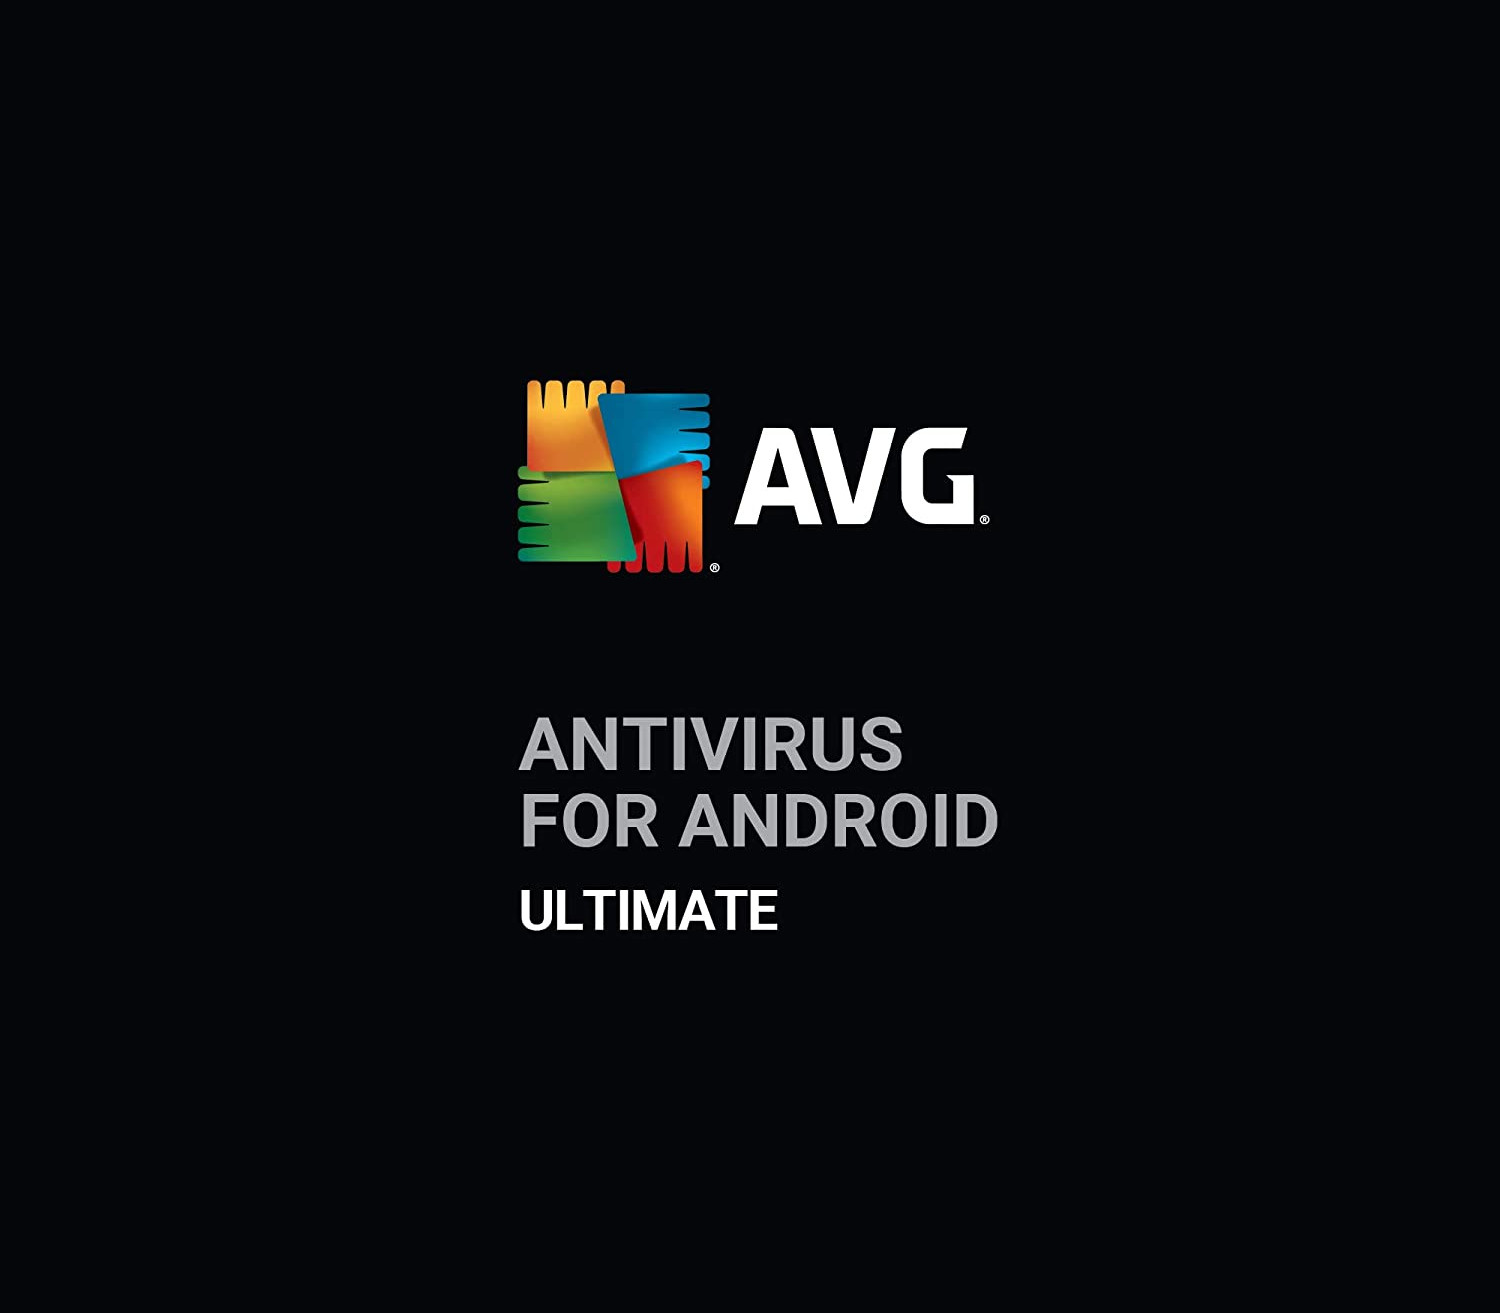 AVG Antivirus for Android - Ultimate Key (3 Years / 1 Device) (11.29$)